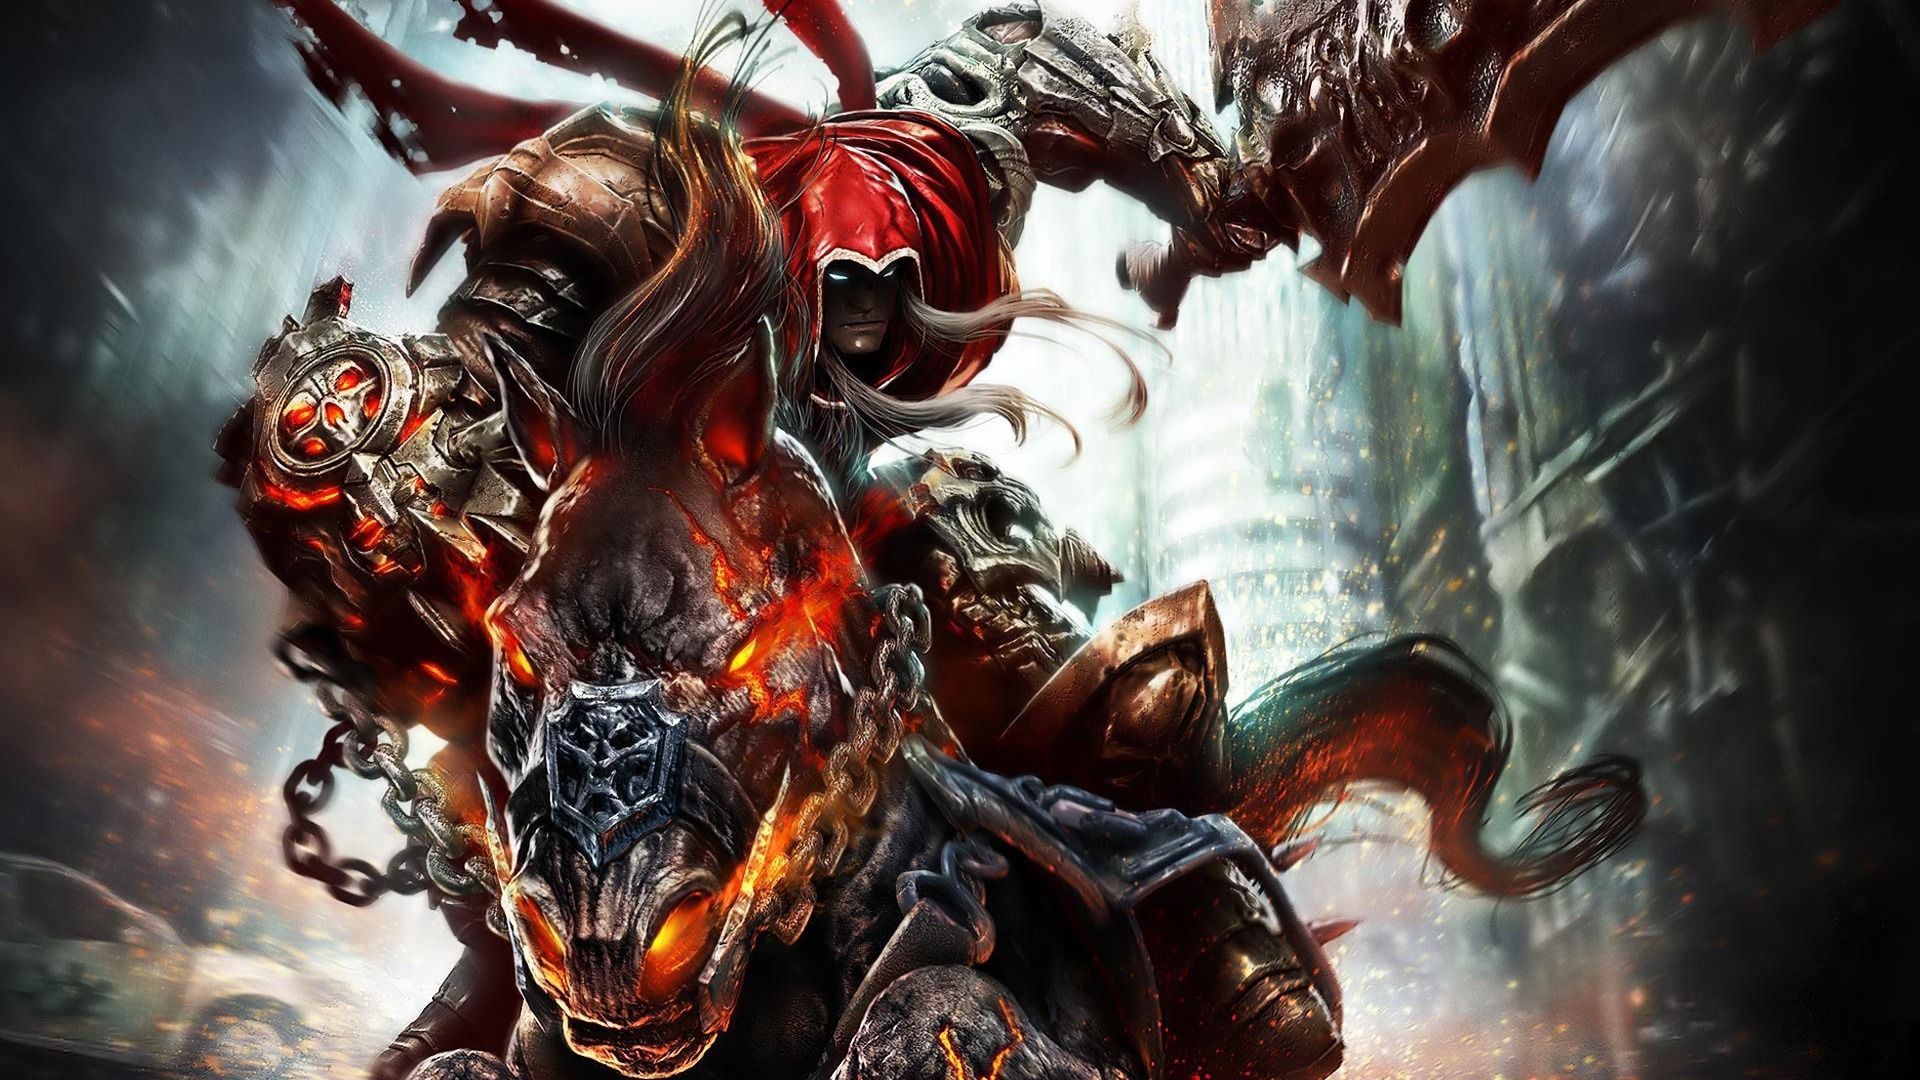 Darksiders War Art Hd Wallpaper, Background Images - Darksiders Warmastered Edition Xbox One , HD Wallpaper & Backgrounds